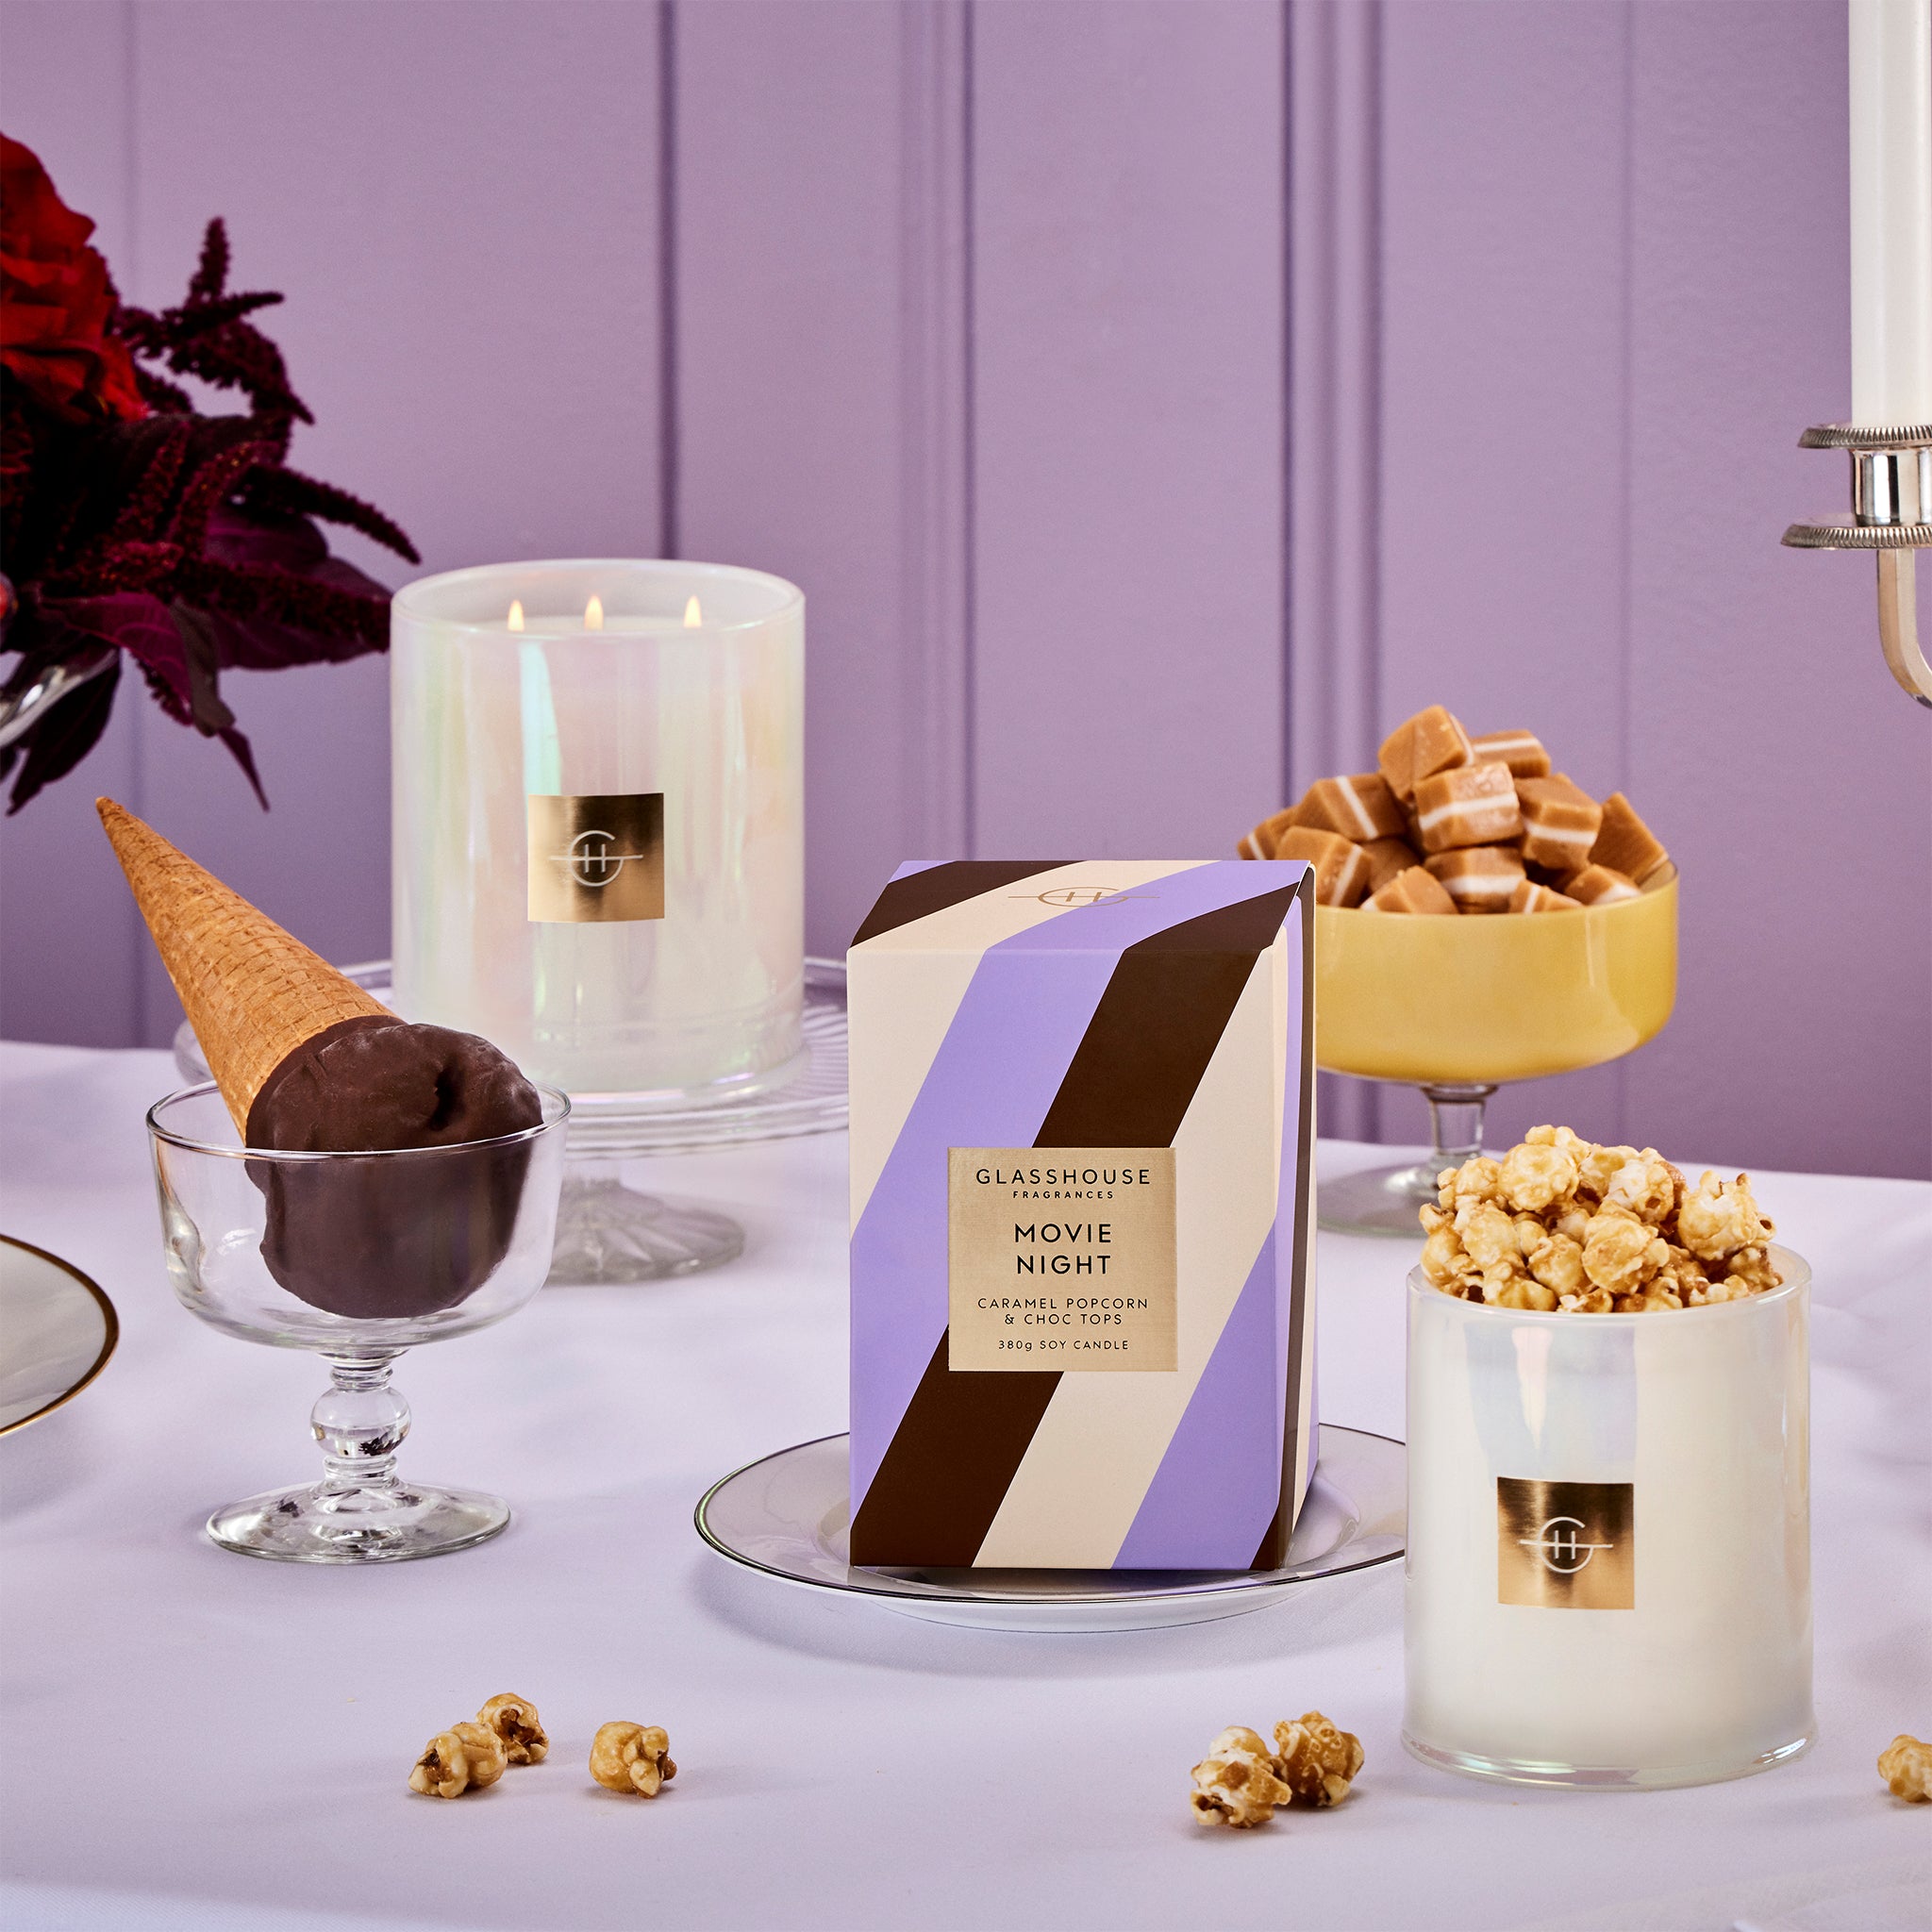 Glasshouse Fragrances Movie Night Popcorn and Choc Tops 380g Soy Candle burning tabletop with choctop, popcorn, sweets